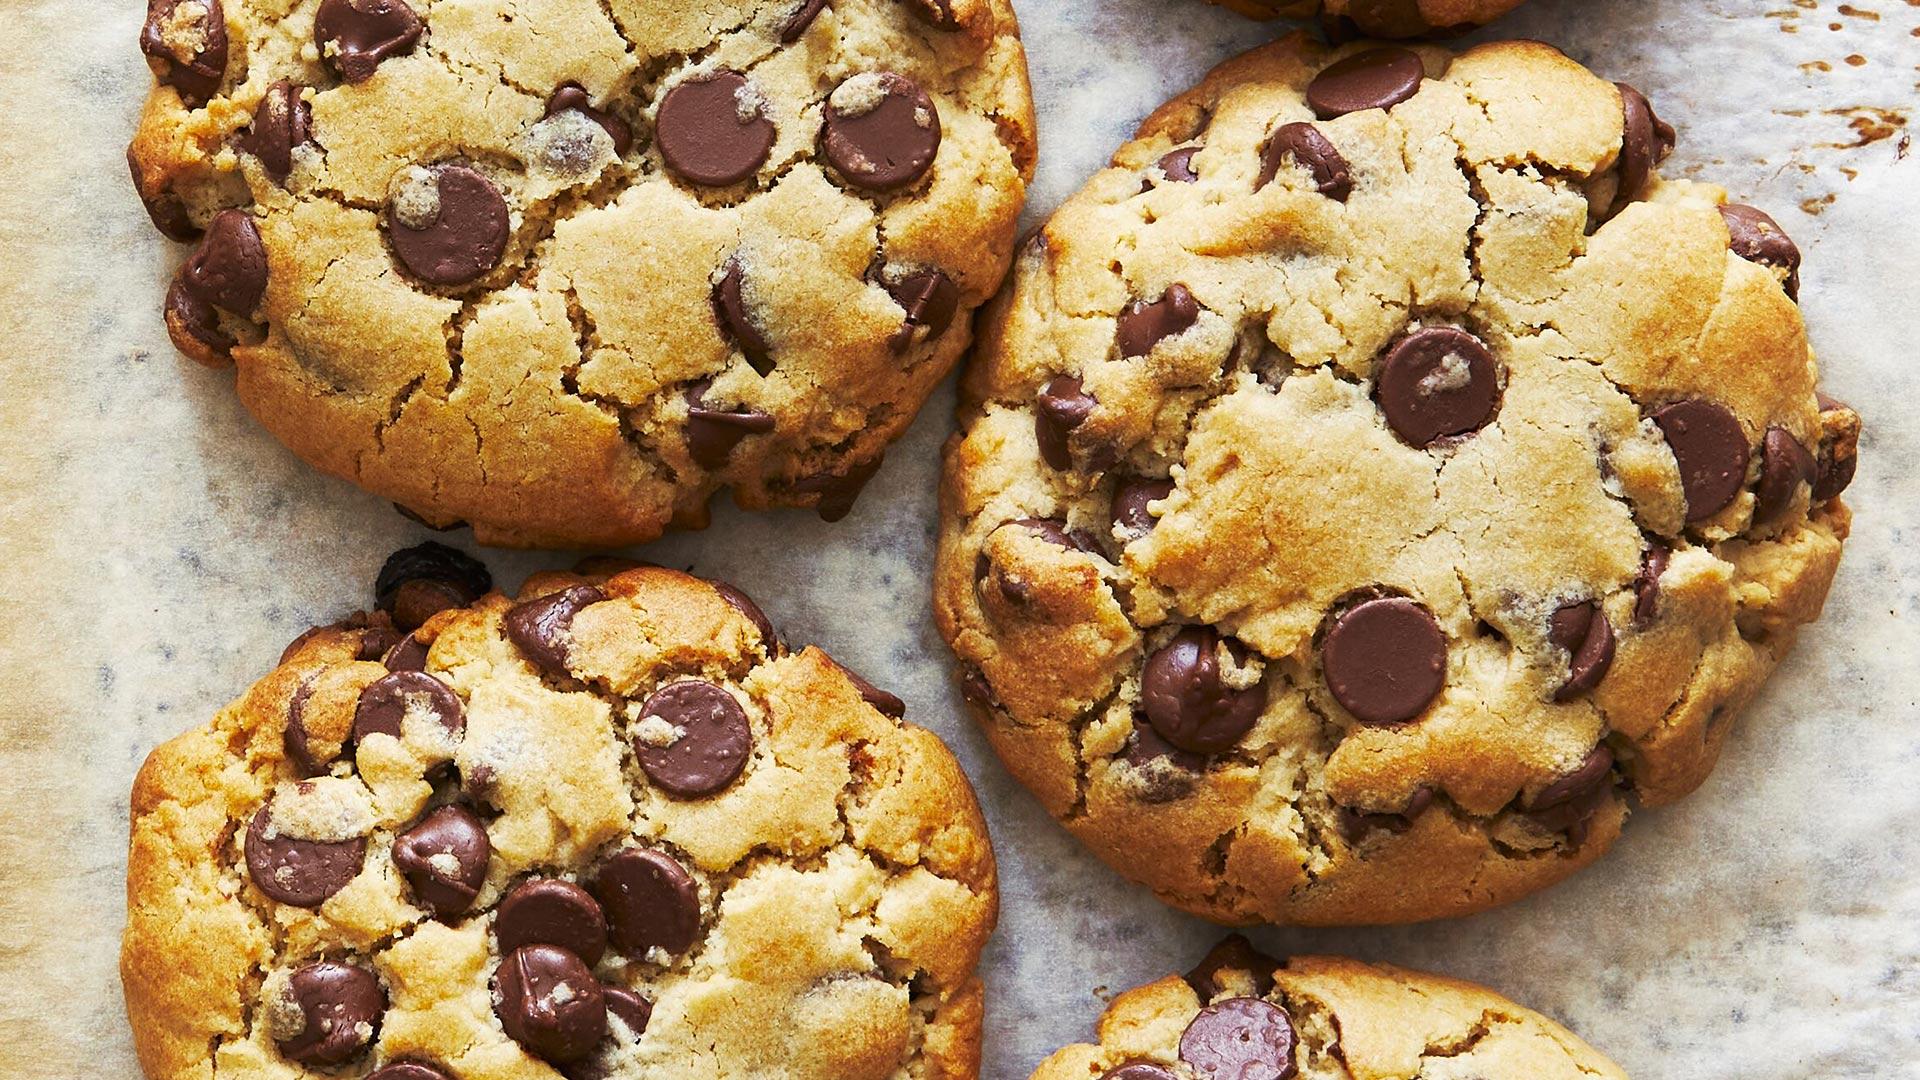 Chocolate Chip Cookie Recipe In Spanish - 109 Best Cookie Recipes To Make Again And Again Epicurious - Can someine give me a chocolate chip cookie recipe in spanish using mandatos afirmativos con tu.